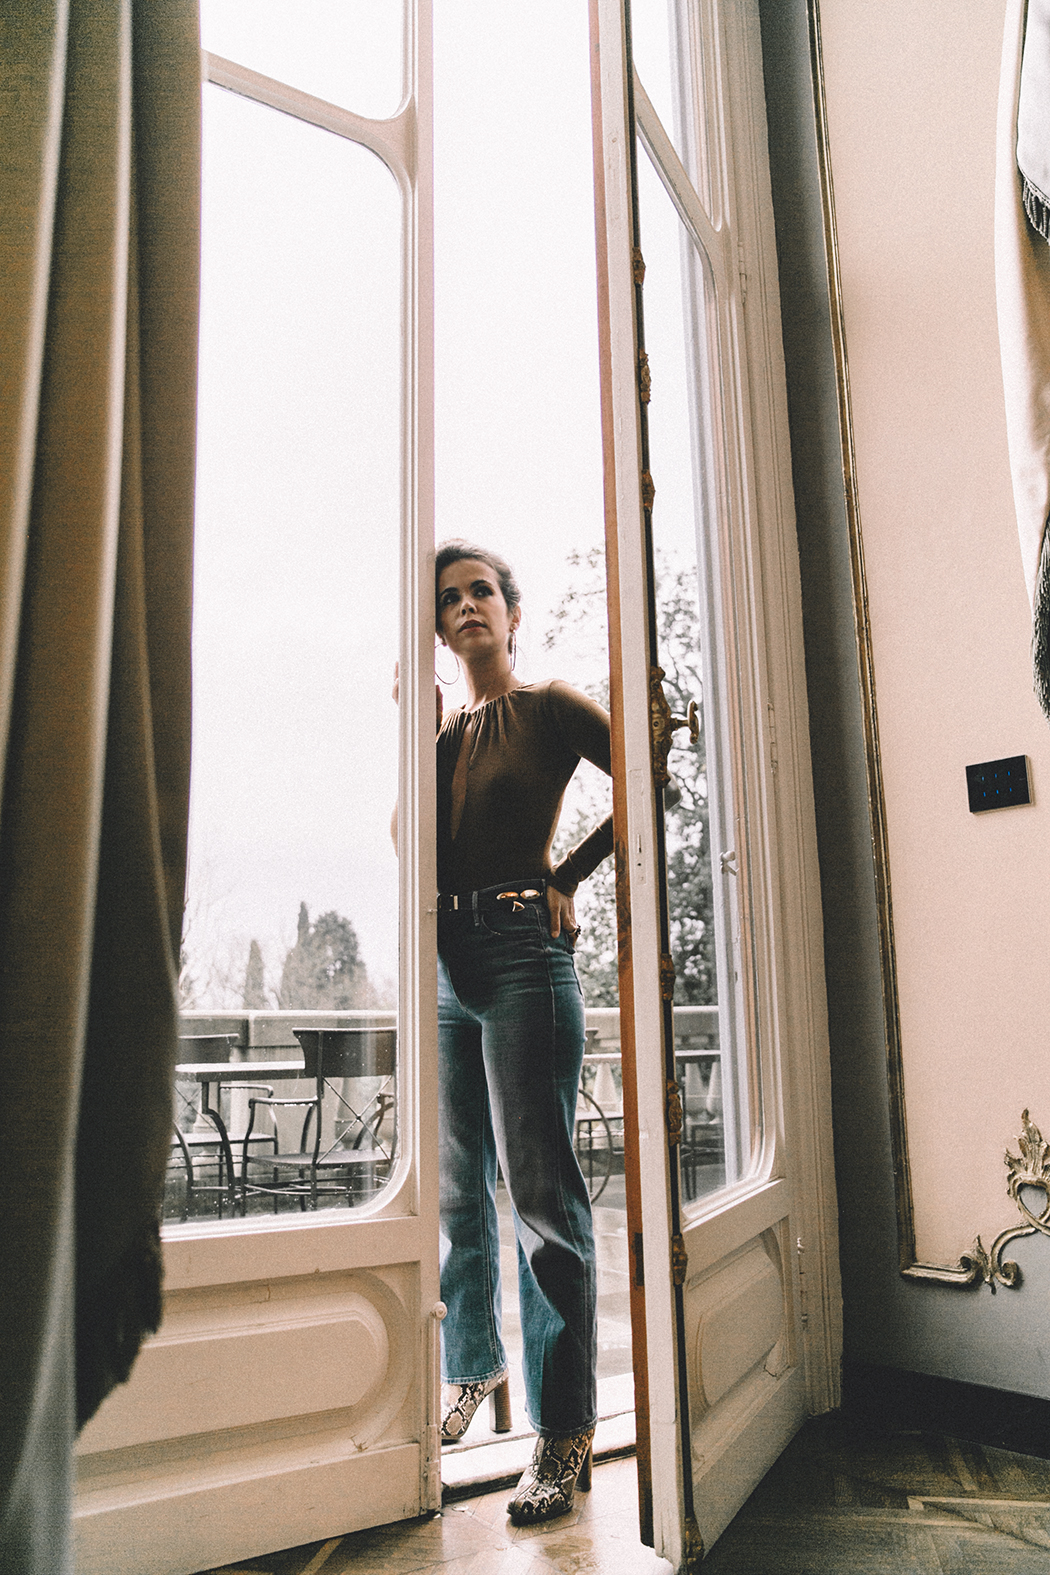 Luisa_Via_Roma-Firenze_For_Ever-Camel_Body-Reformation-Mother_Jeans-Snake_Boots-Hoop_Earrings-Outfit-Collage_Vintage-Florence-Villa_Cora_Hotel-85